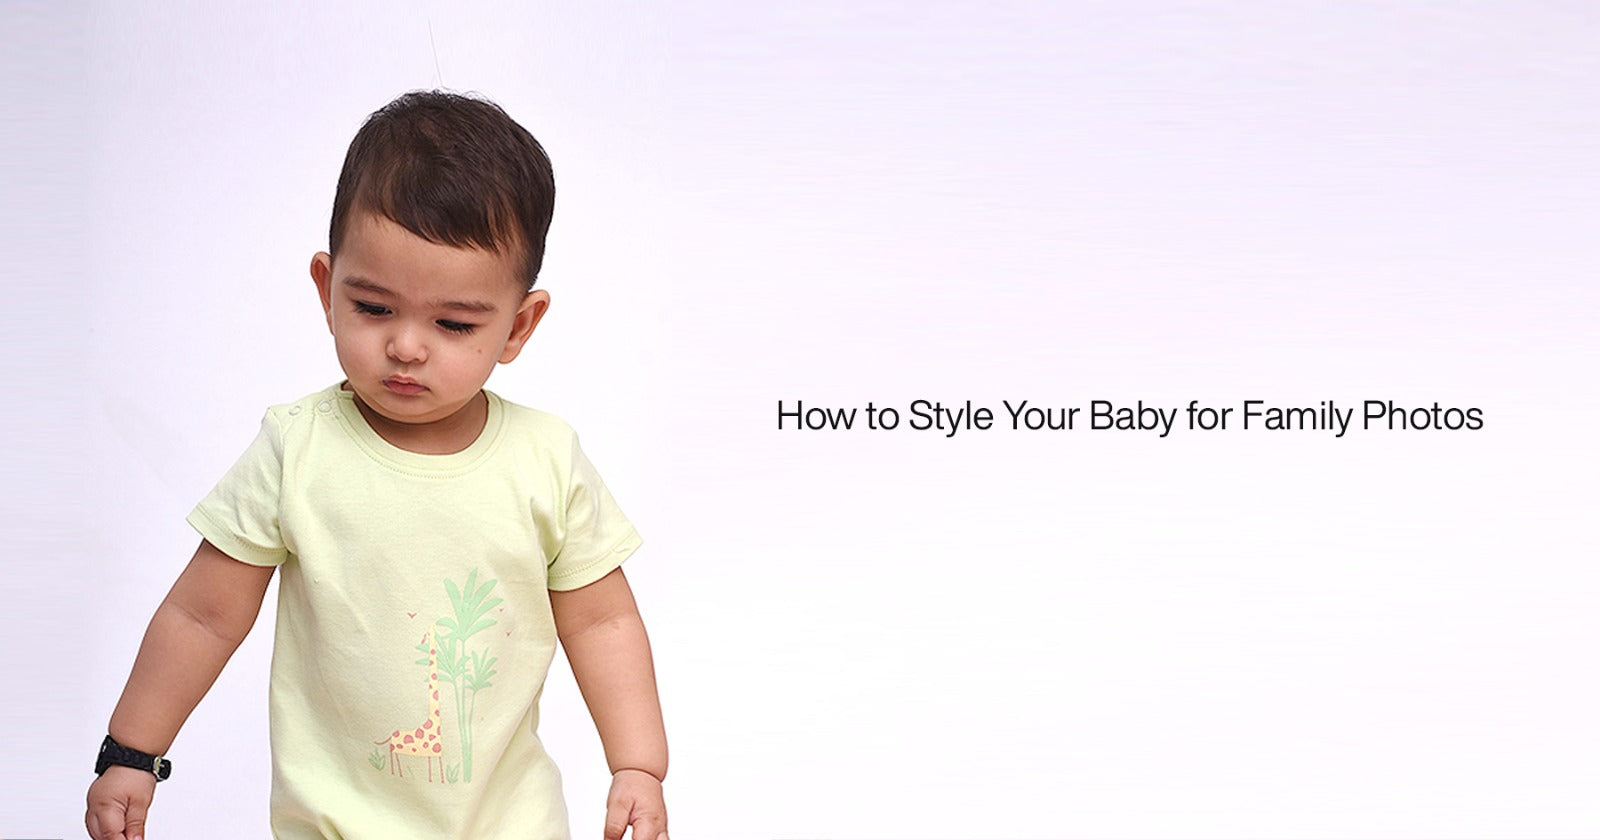 How to Style Your Baby for Family Photos